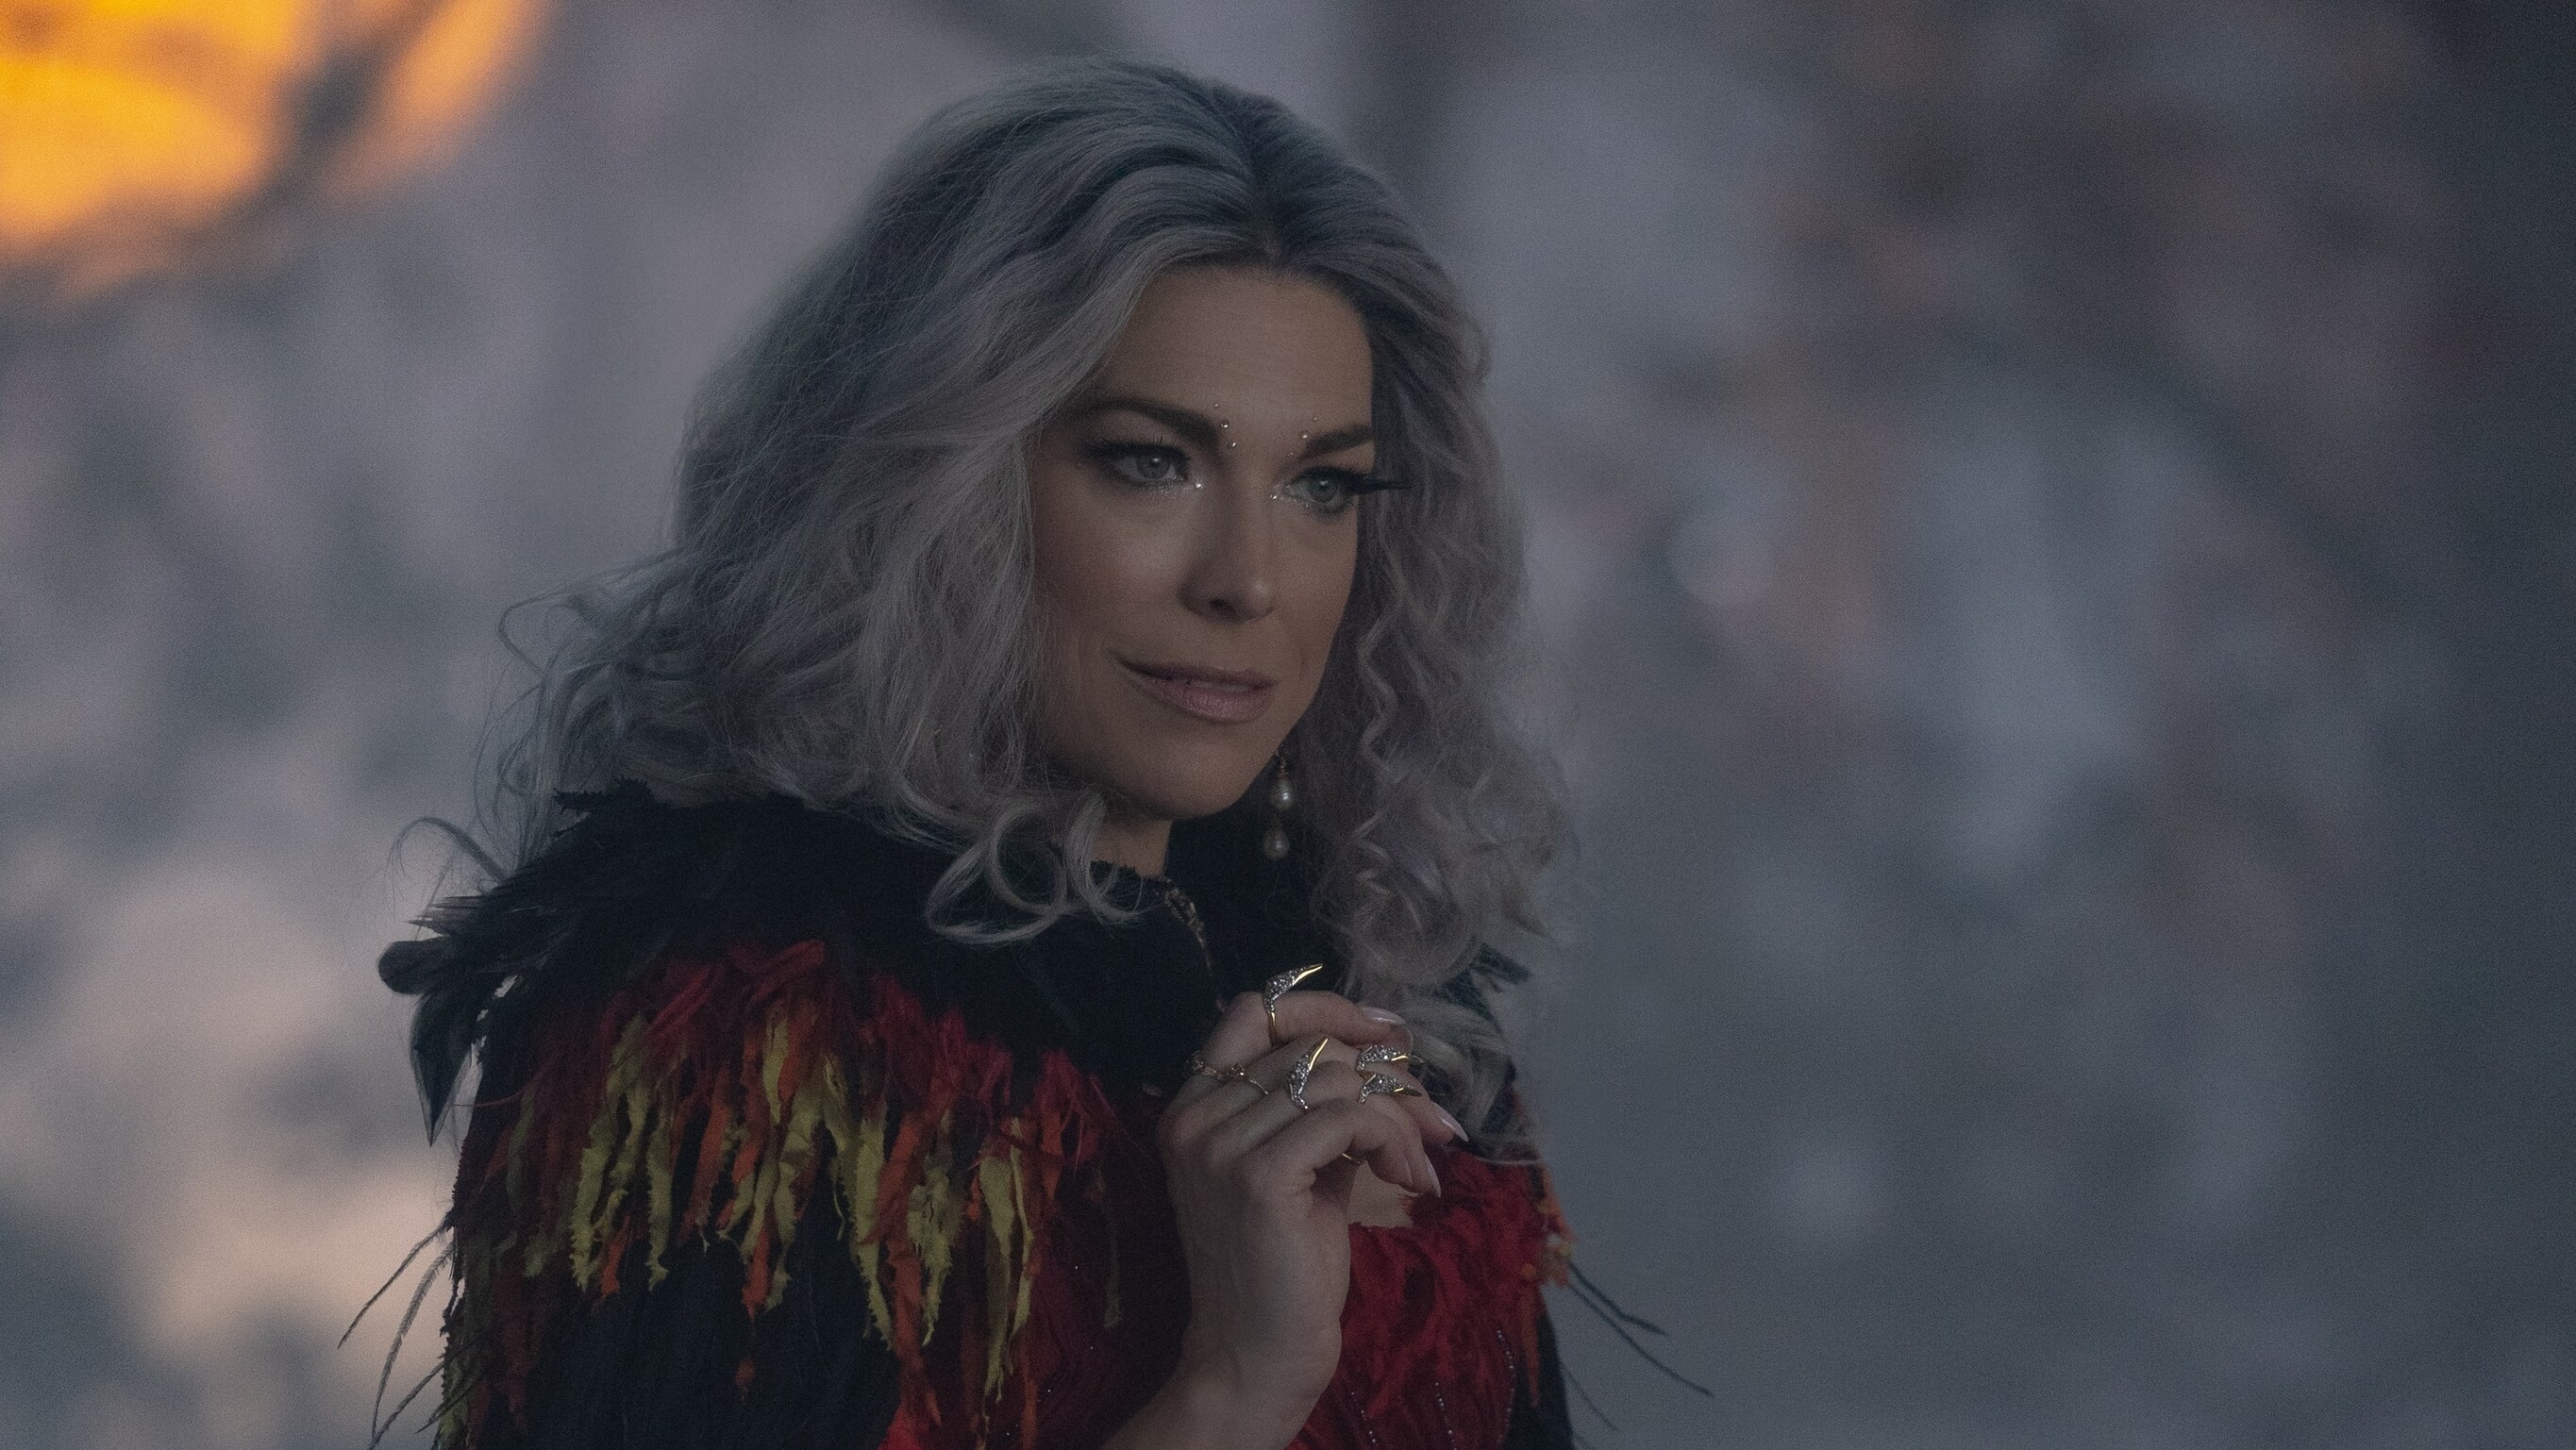 Hannah Waddingham as The Witch in HOCUS POCUS 2, exclusively on Disney+. Photo by Matt Kennedy. © 2022 Disney Enterprises, Inc. All Rights Reserved.